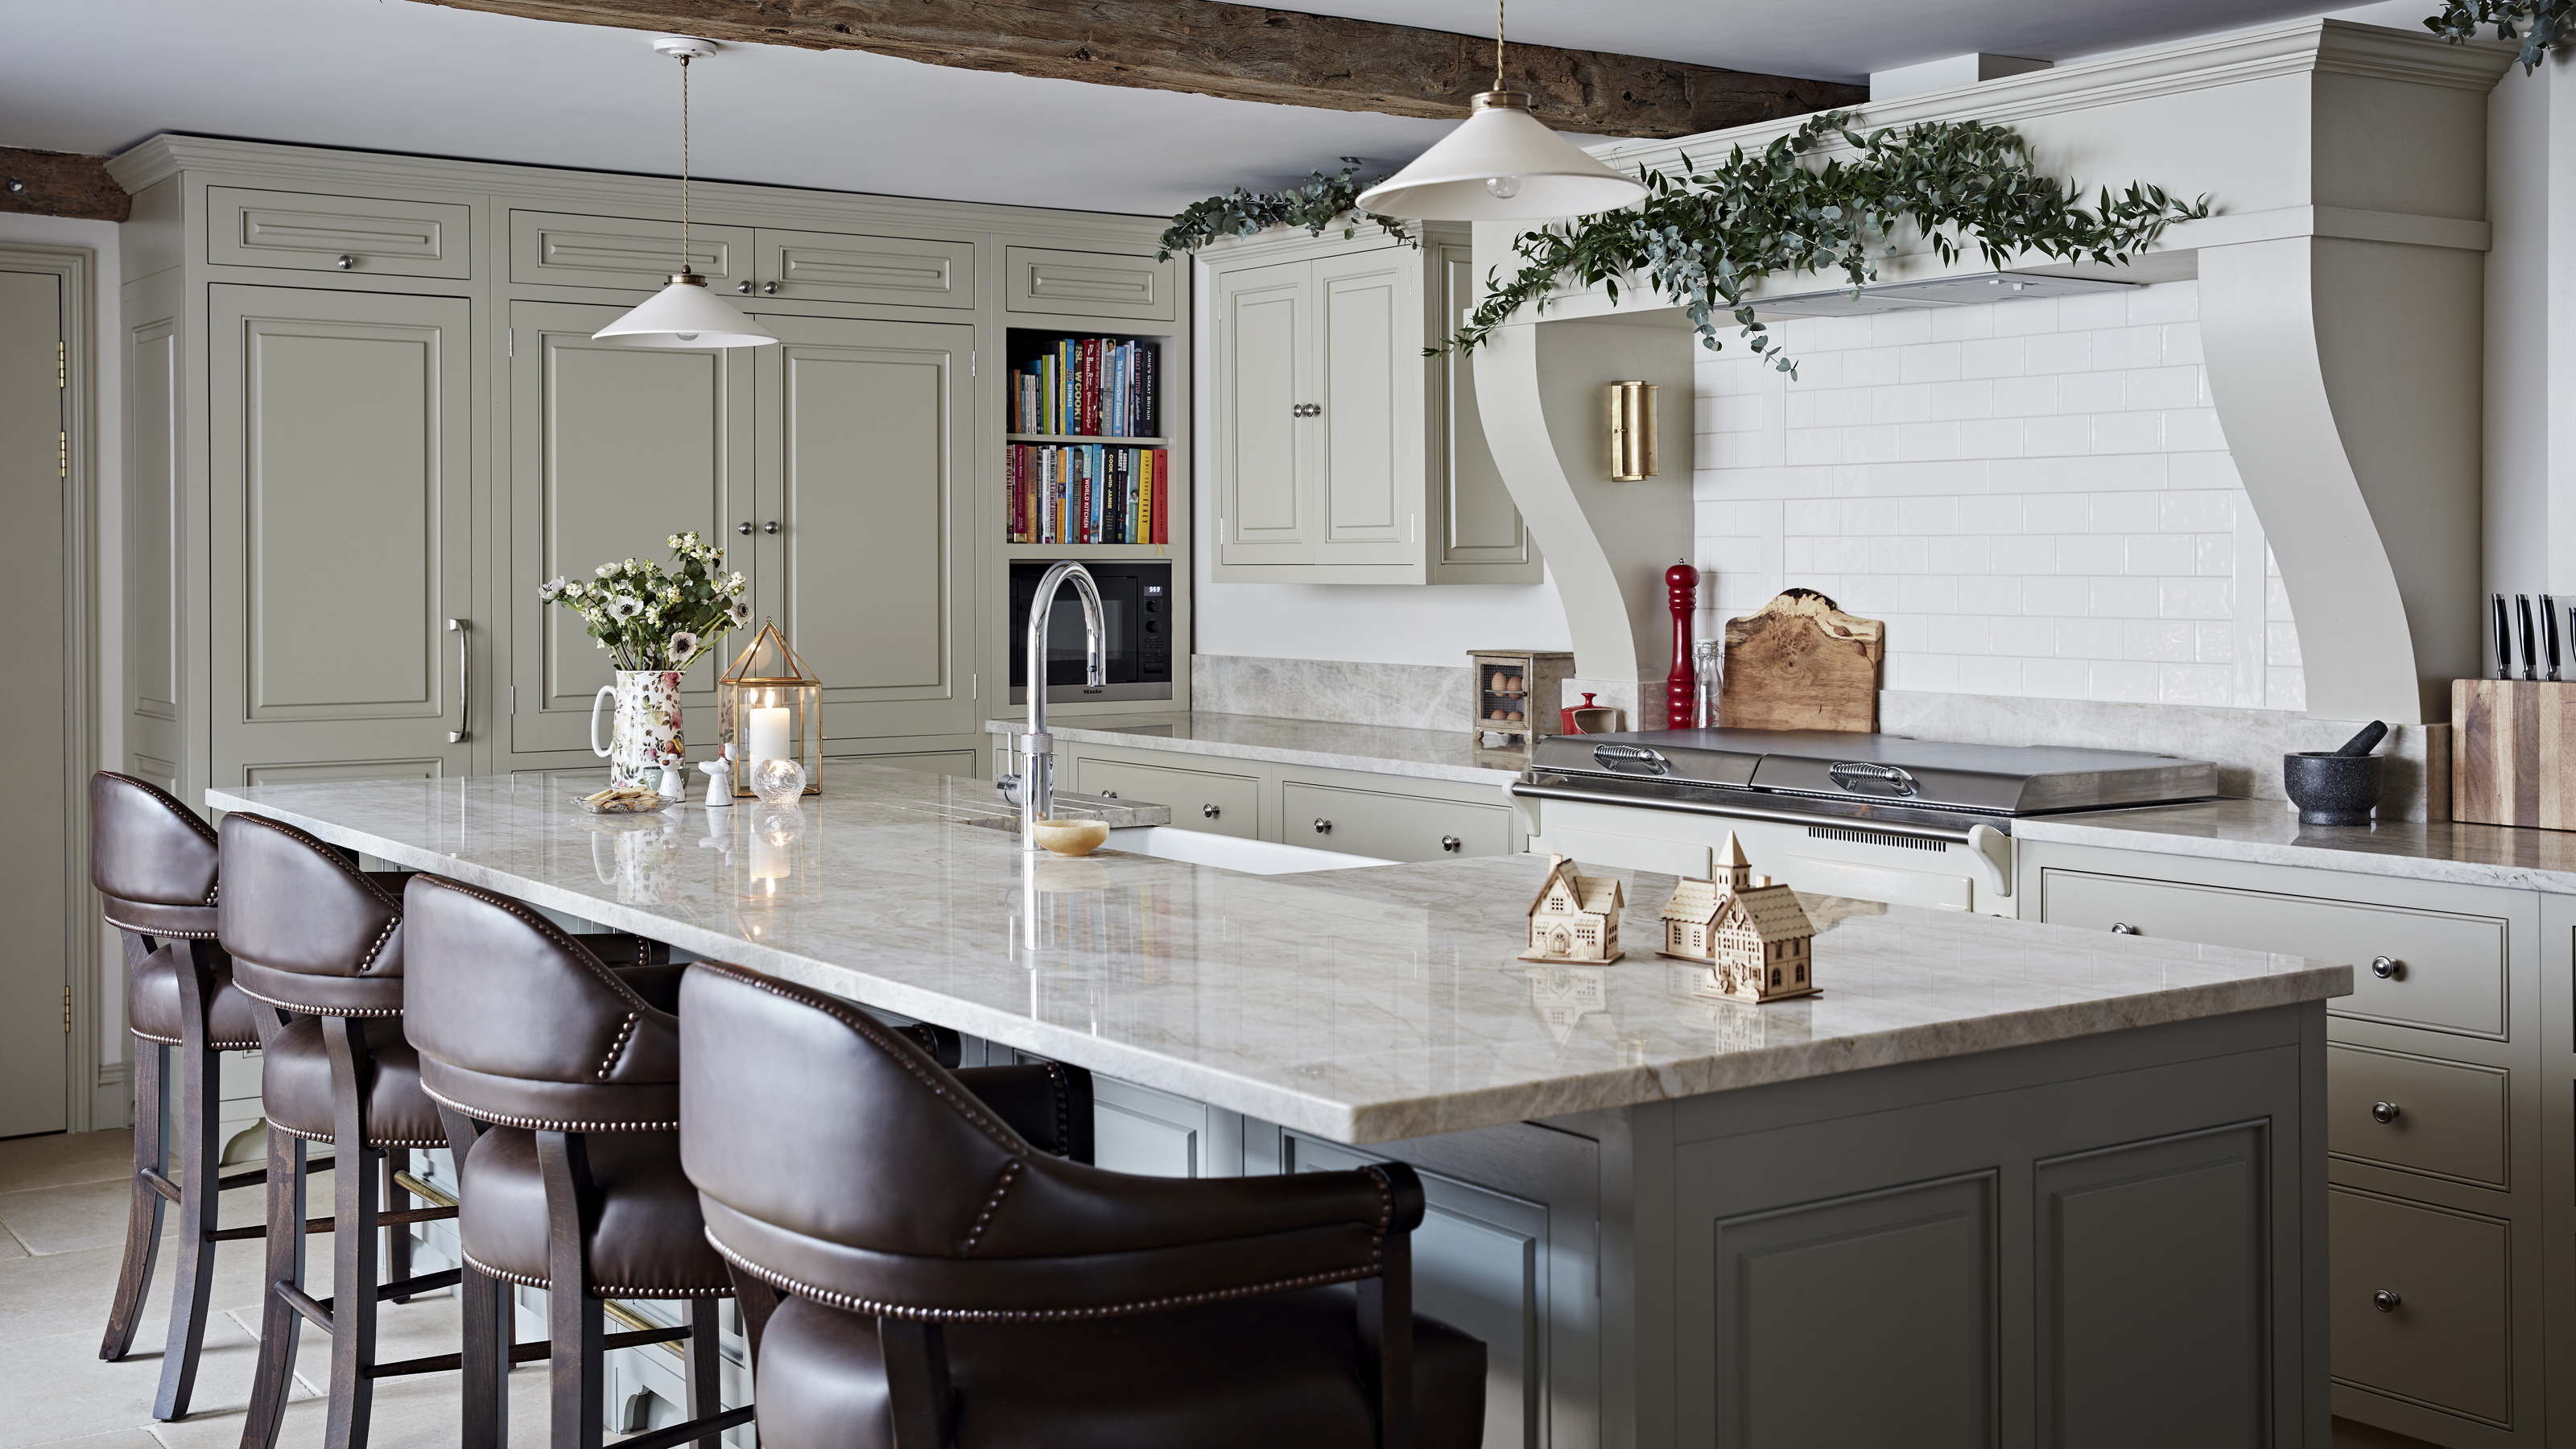 kitchen corner cabinets: 10 stylish tips to maximize space |